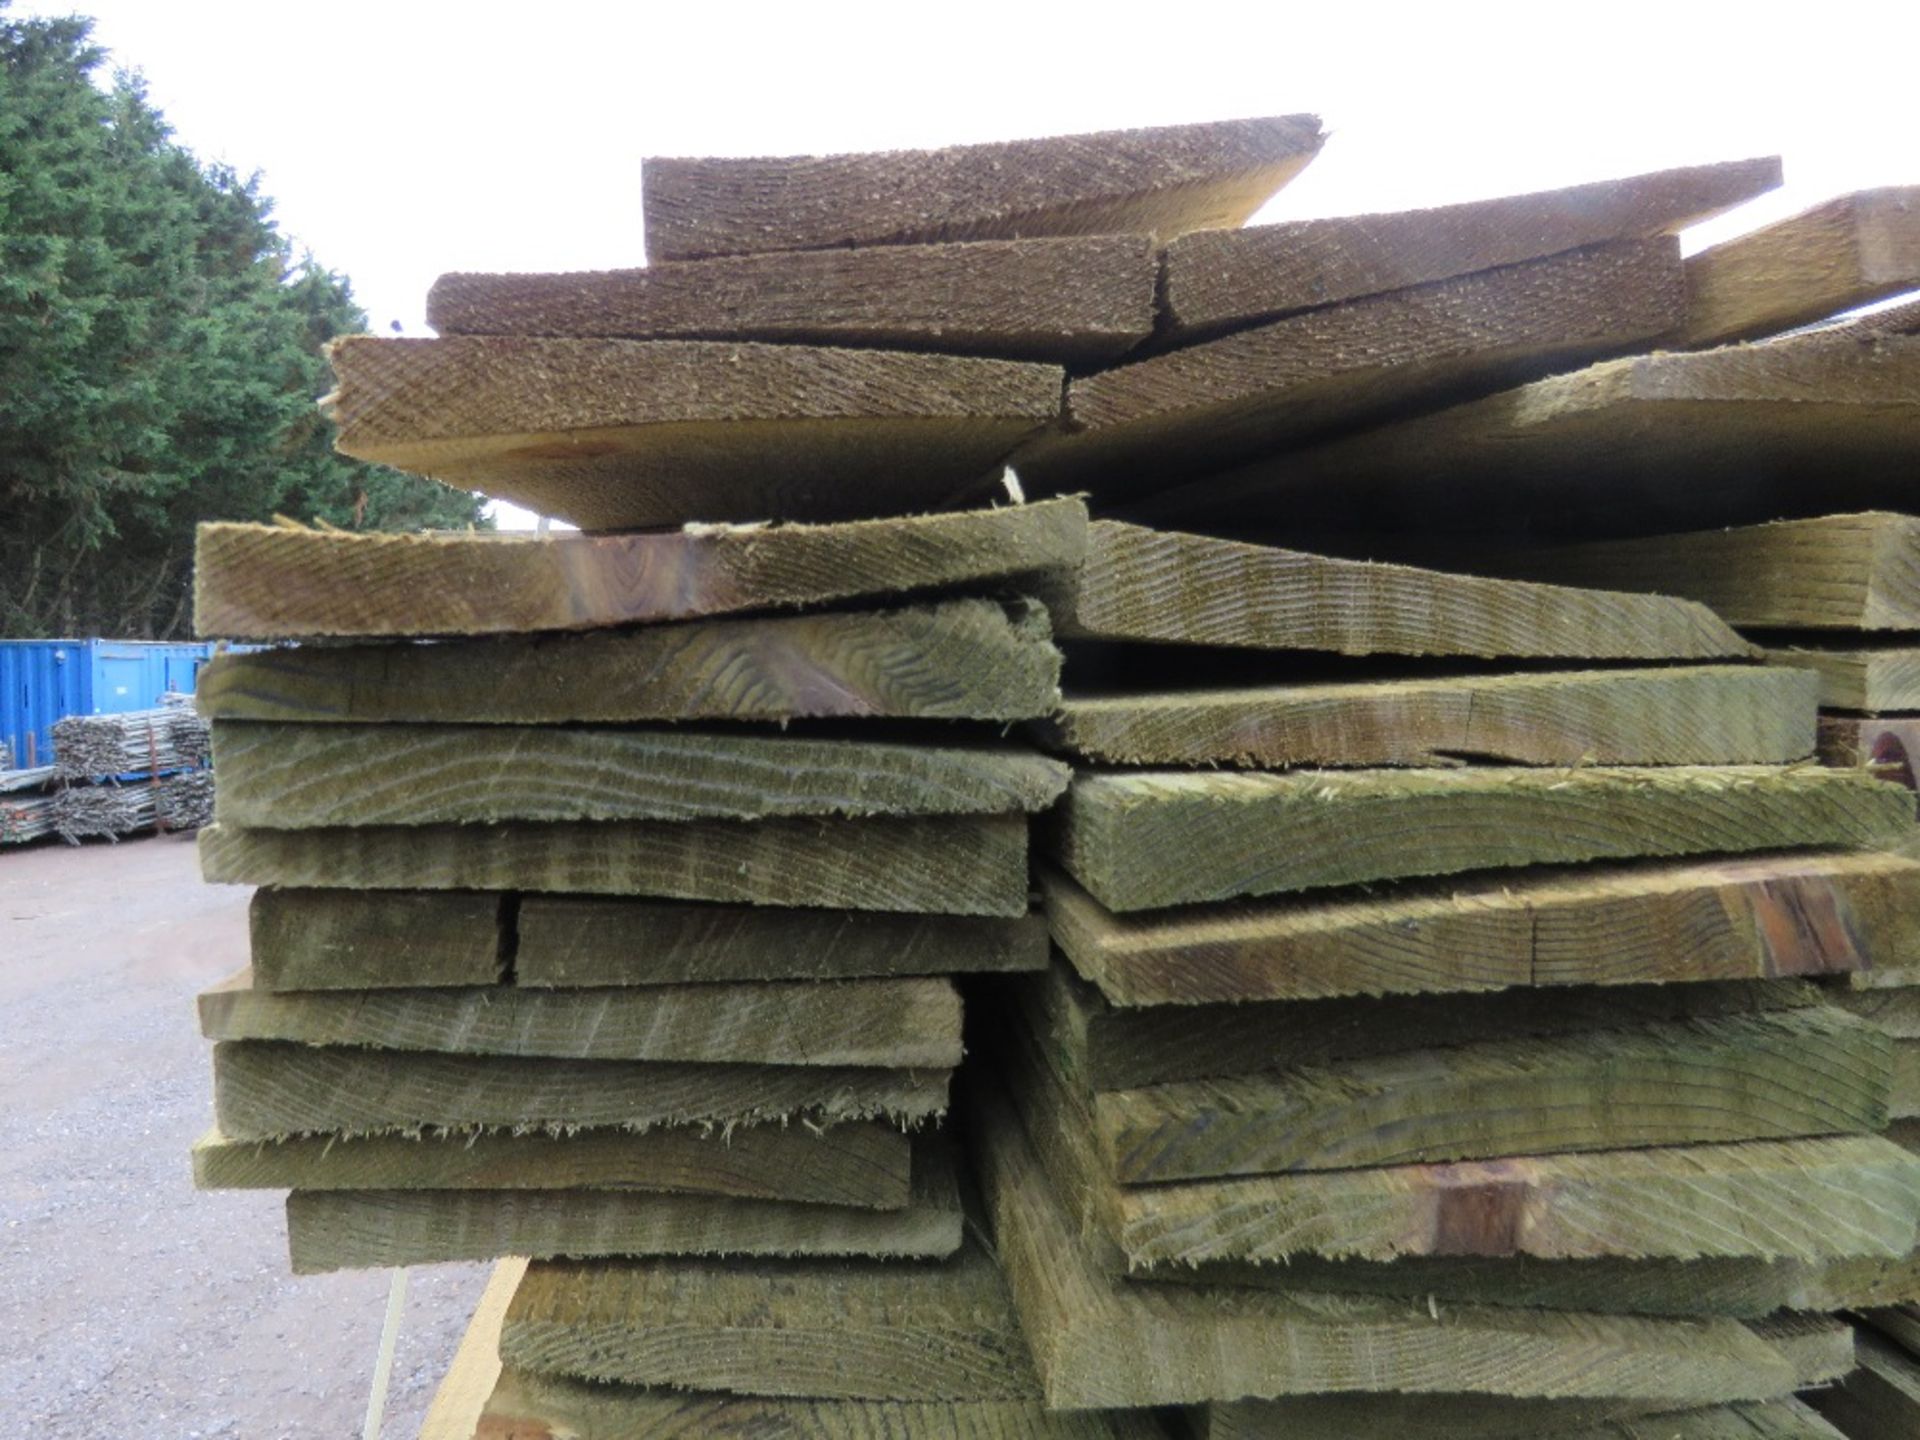 LARGE PACK OF PRESSURE TREATED FEATHER EDGE FENCE CLADDING TIMBER BOARDS: 1.8M LENGTH X 10CM WIDTH A - Image 3 of 3